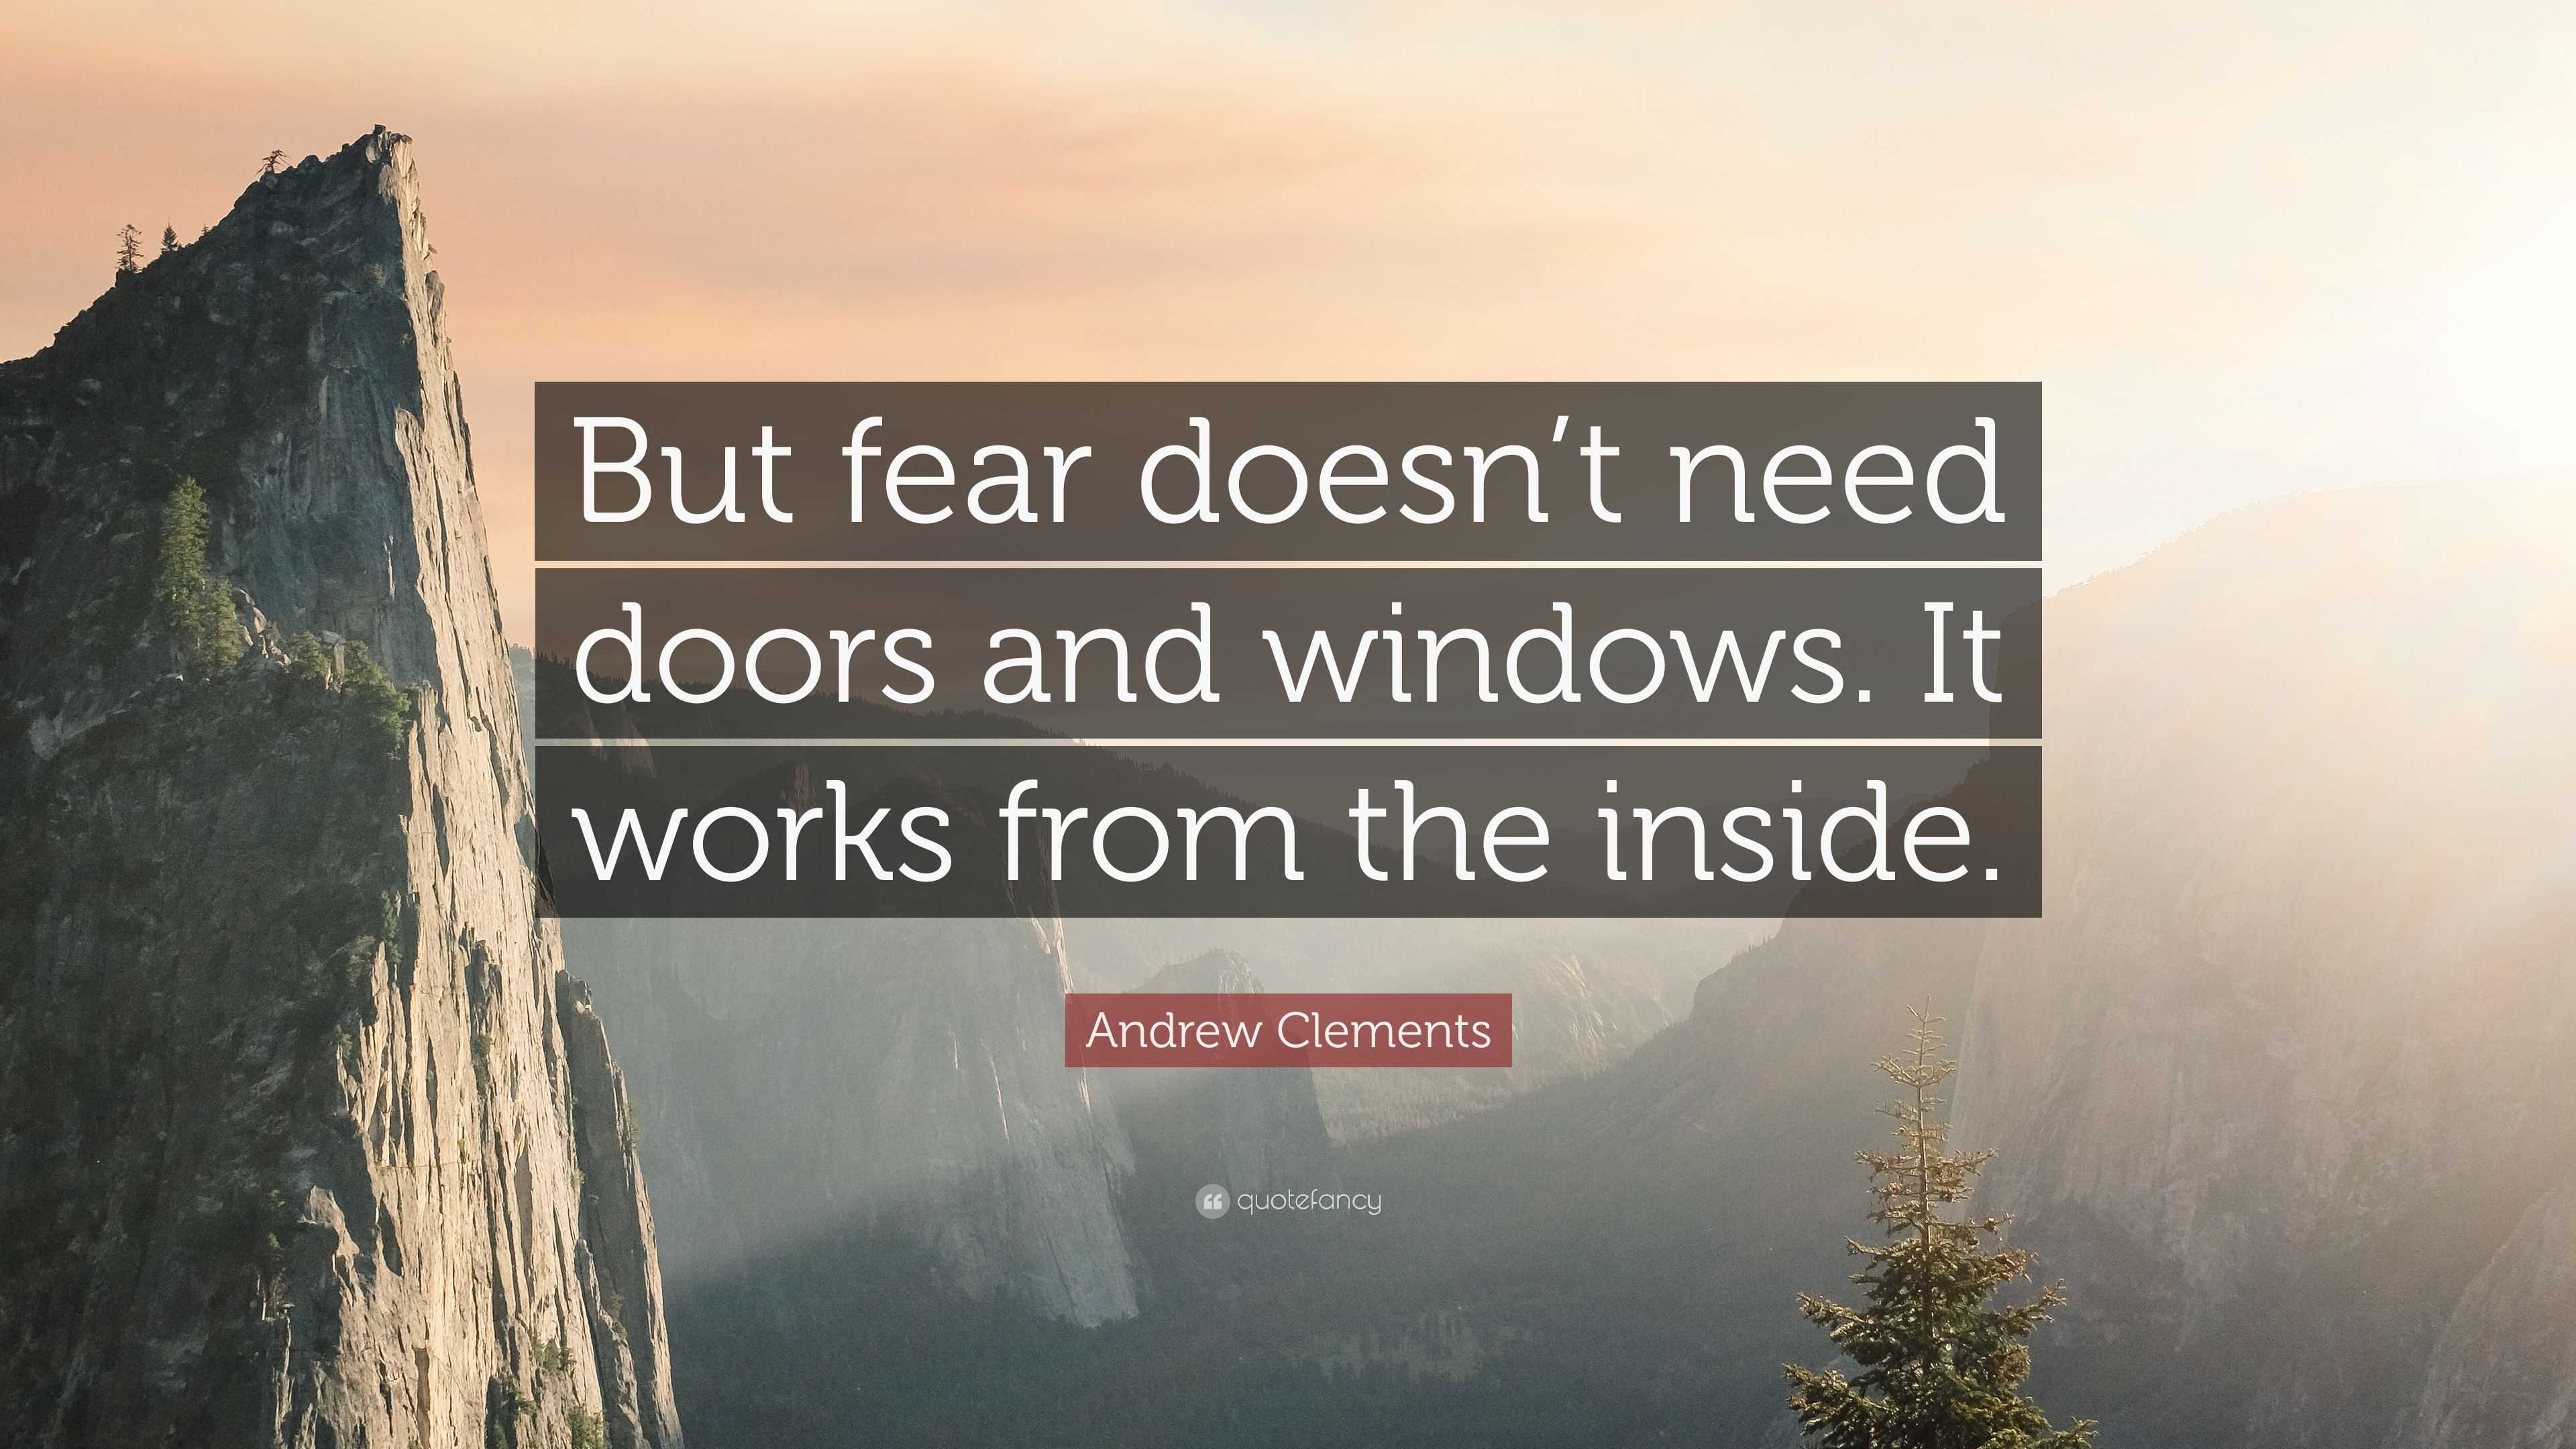 Andrew Clements Quote: “But fear doesn’t need doors and windows. It ...